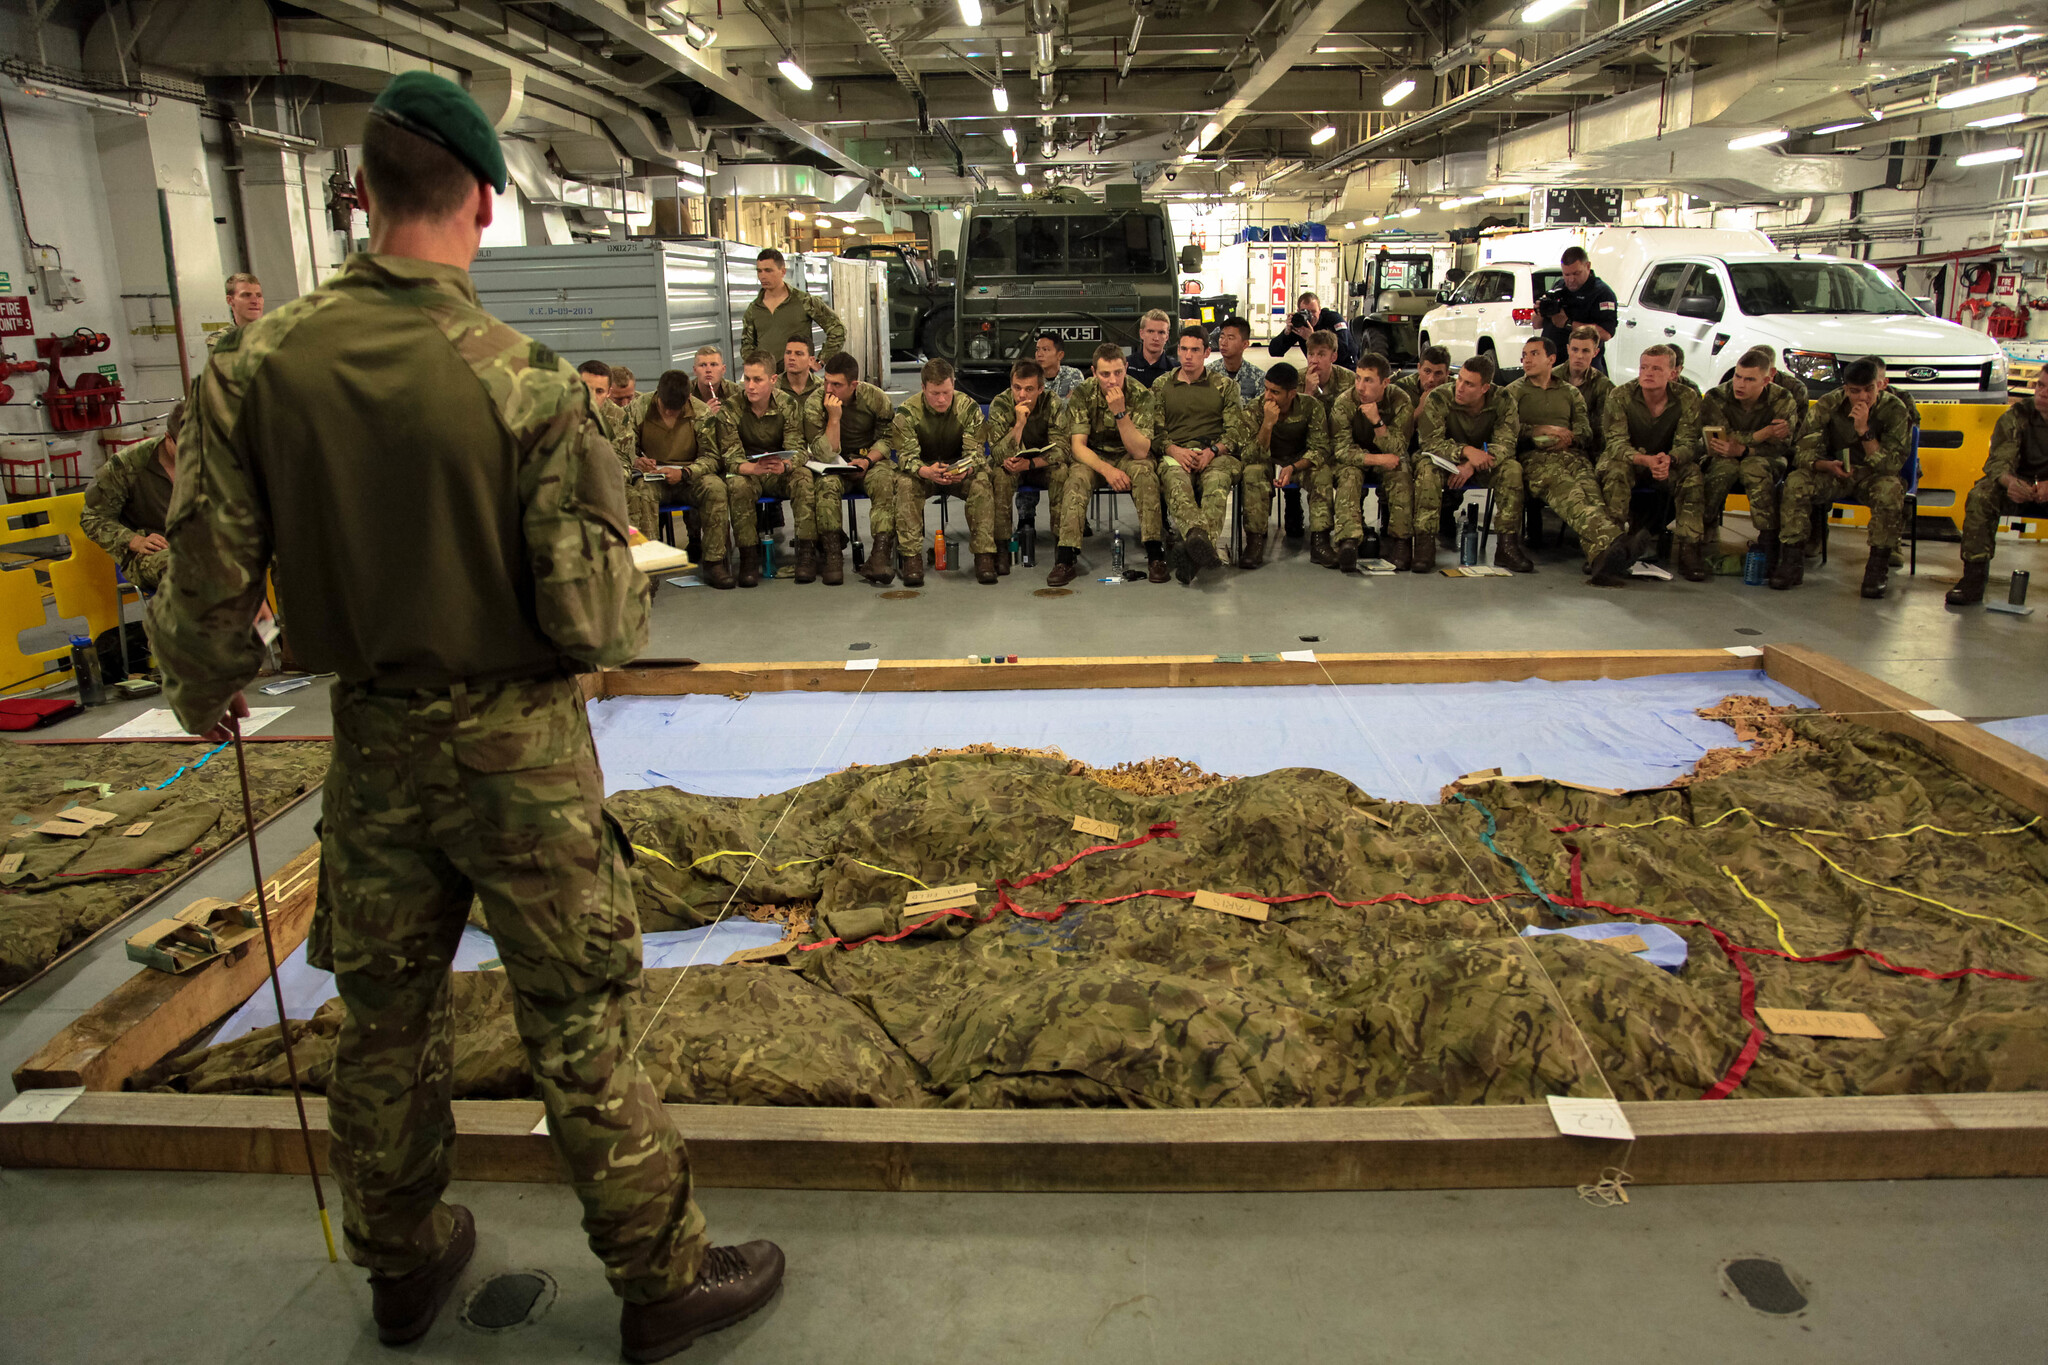 A Royal Marine commando briefs Royal Marines, U.S. Marines, Royal Navy personnel and Singaporean observers in the vehicle deck of HMS Ocean (U.K.) during BALTOPS 2016. (NATO)